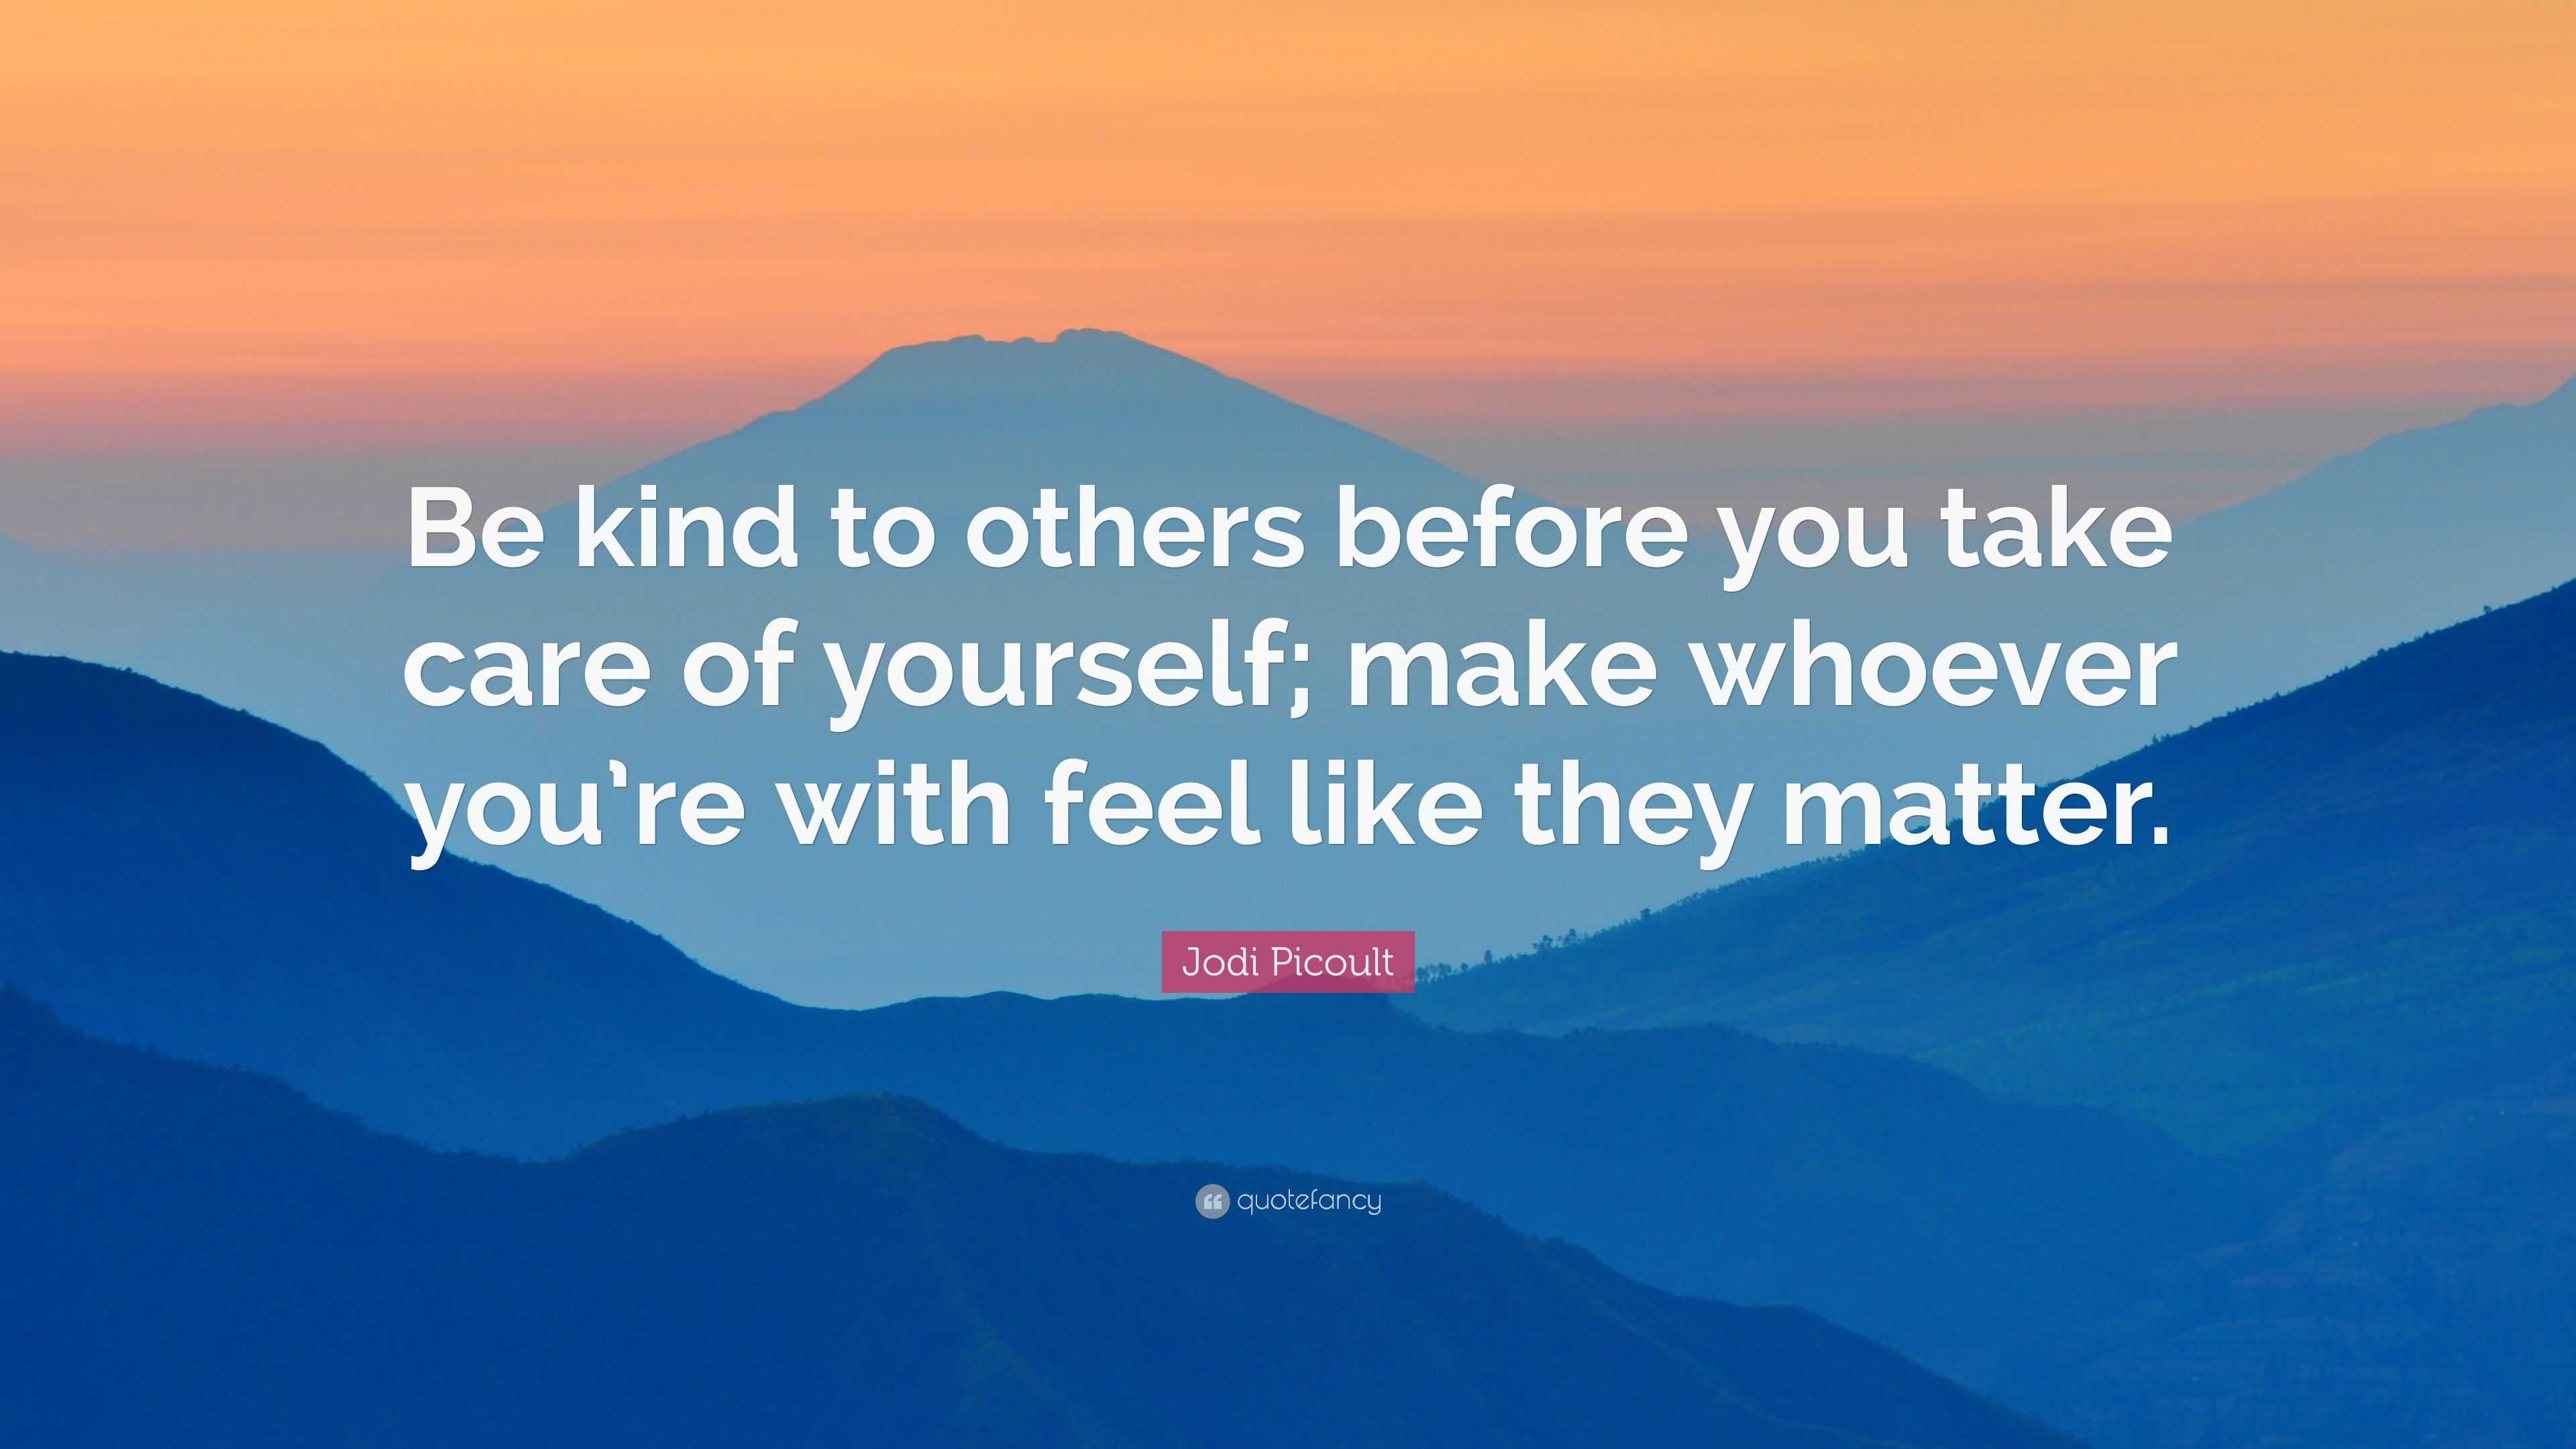 Jodi Picoult Quote: “Be kind to others before you take care of yourself ...